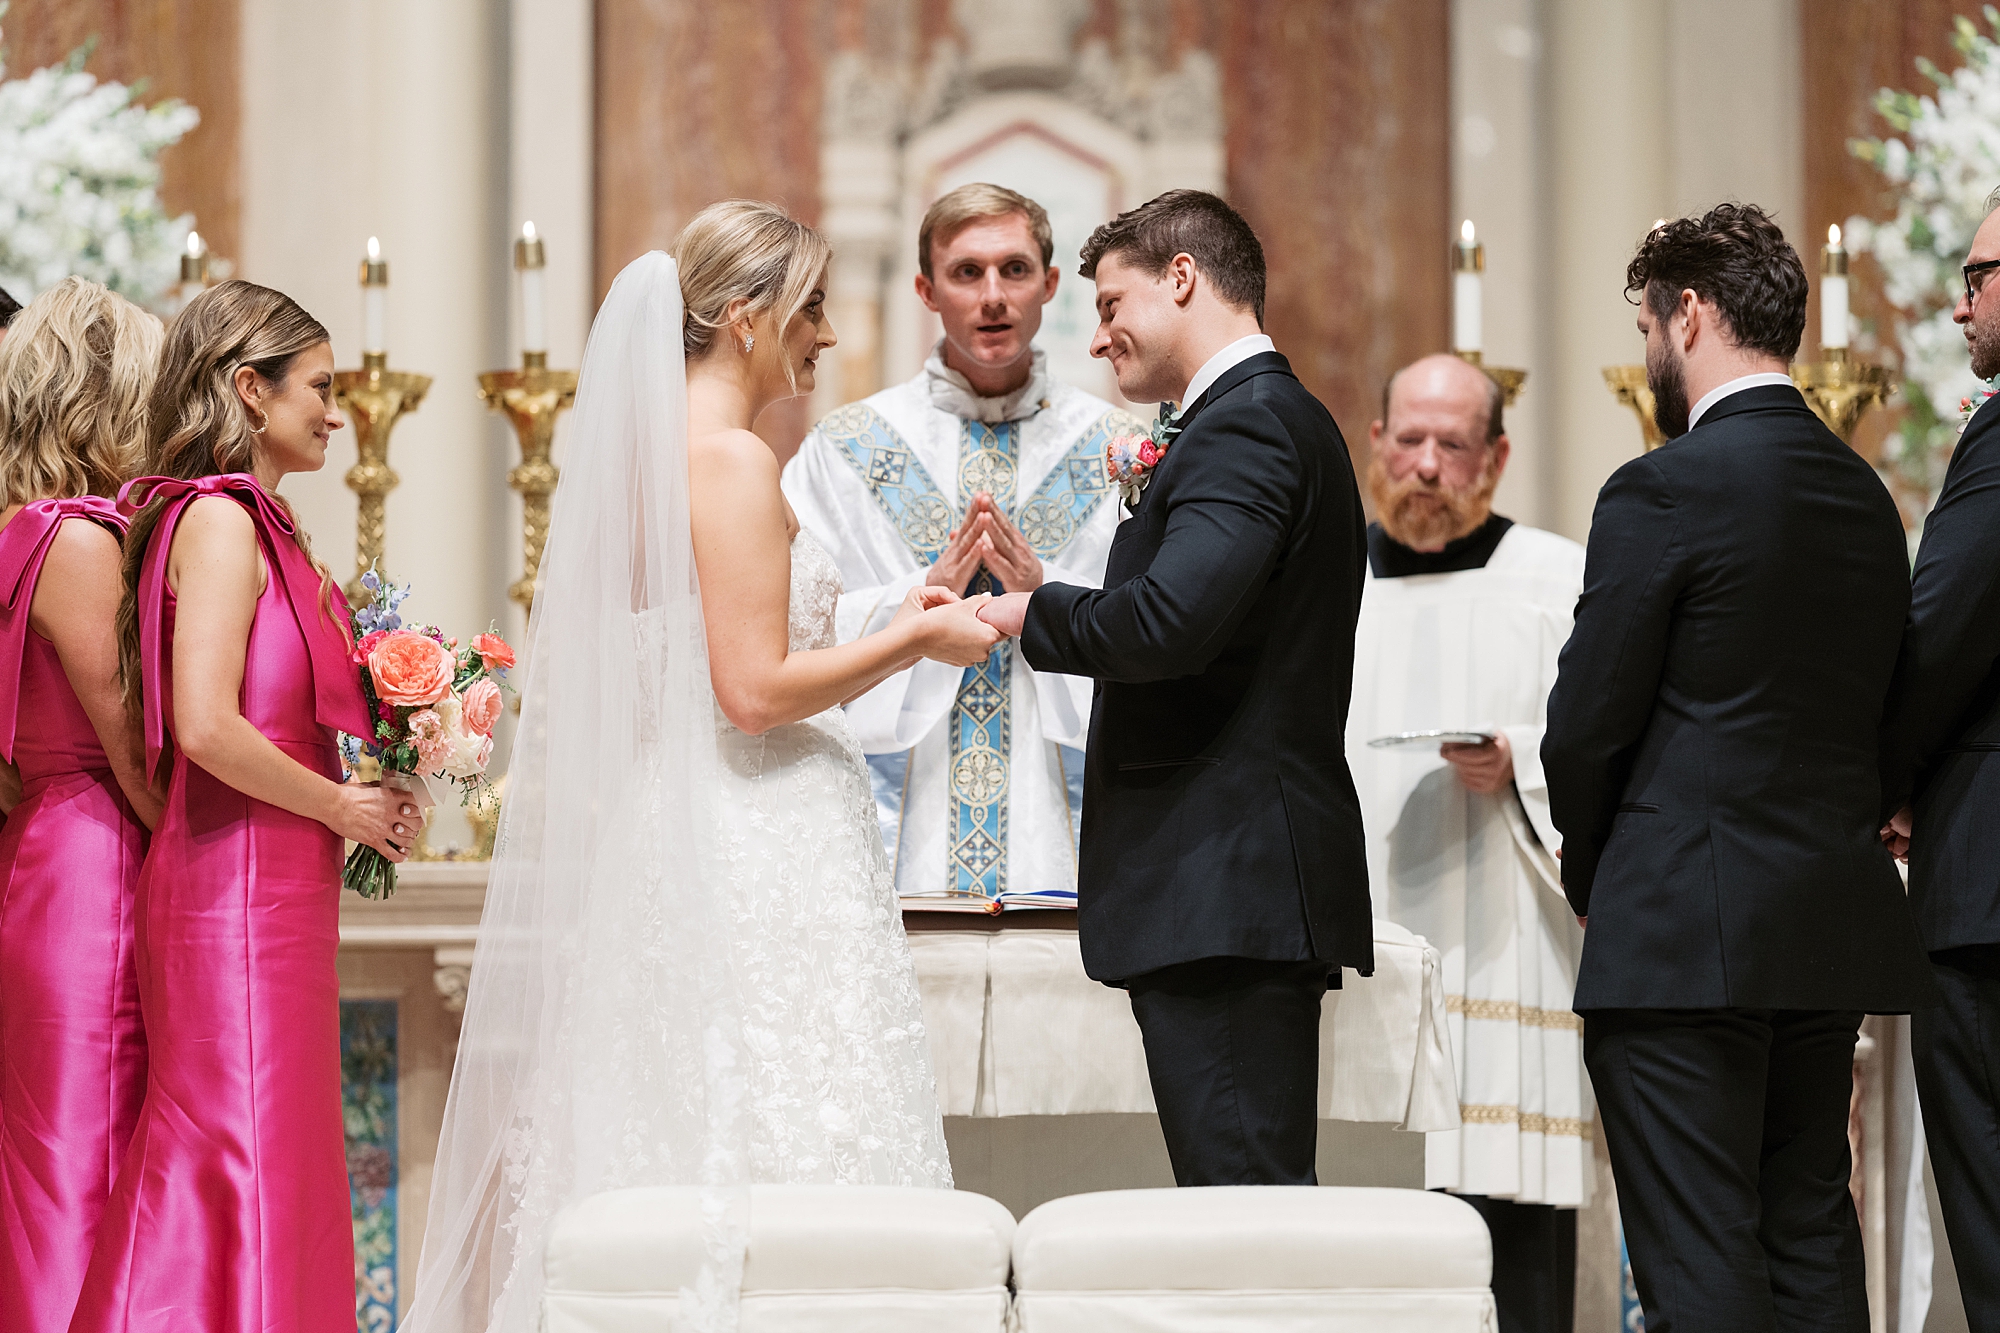 newlyweds exchange rings and vows inside the Cathedral of St. John the Evangelist